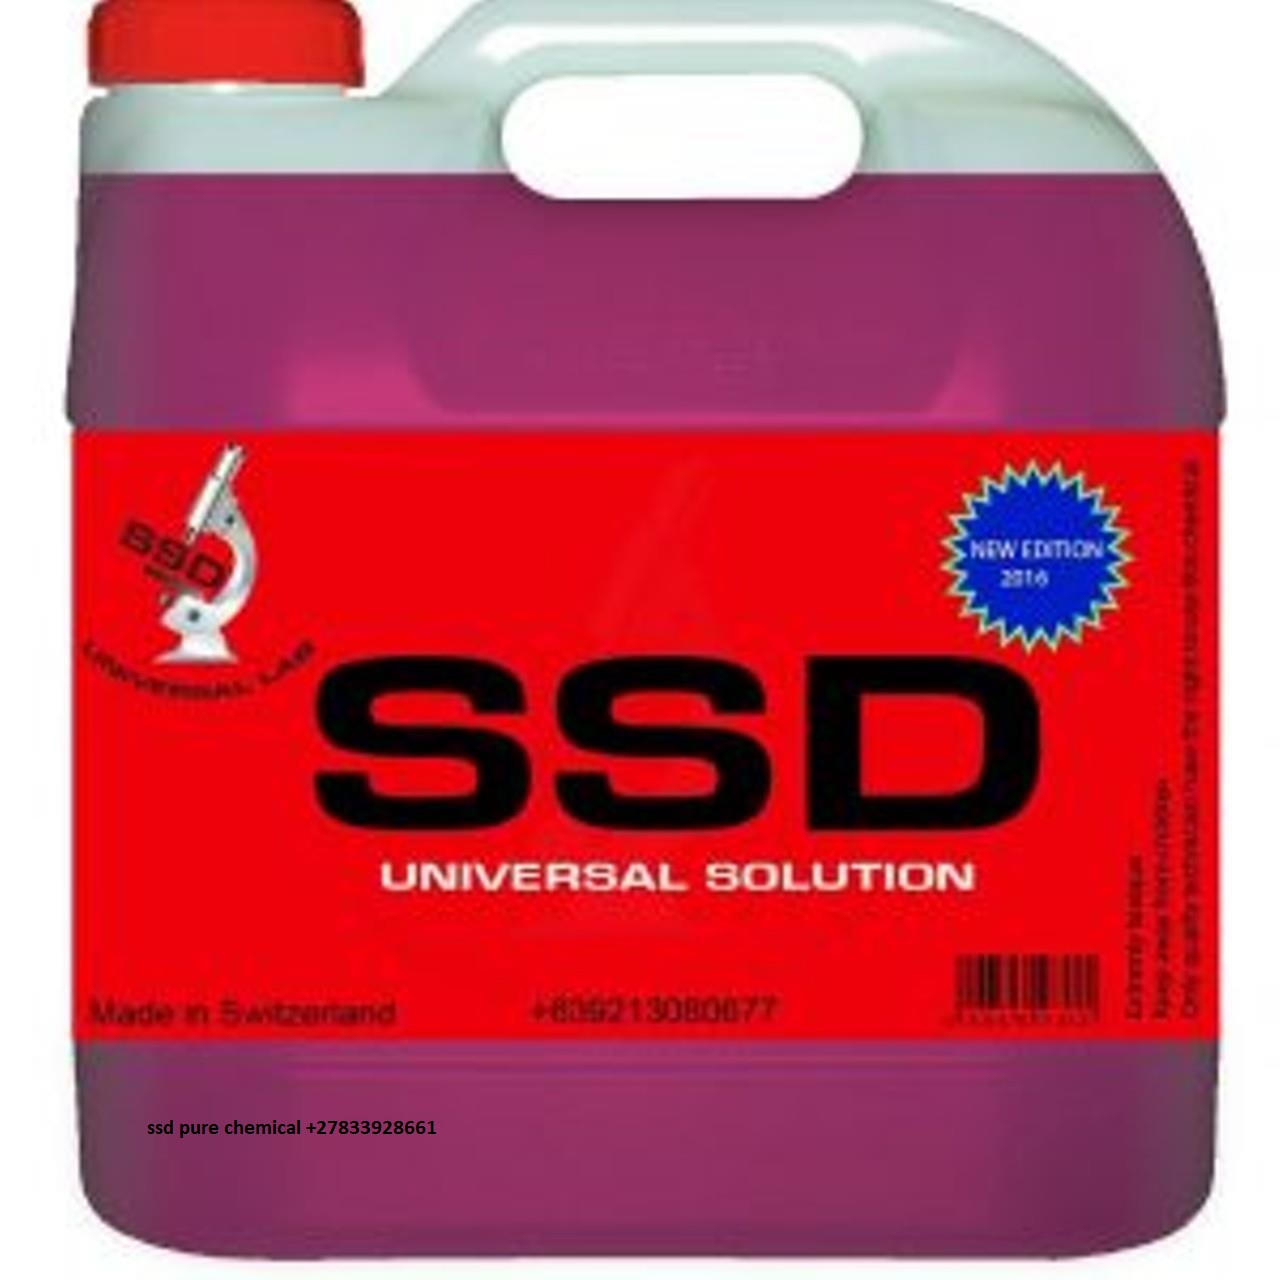 @SSD CHEMICAL SOLUTIONS+27833928661 AND ACTIVATION POWDER FOR CLEANING,Sandton,Services,Free Classifieds,Post Free Ads,77traders.com